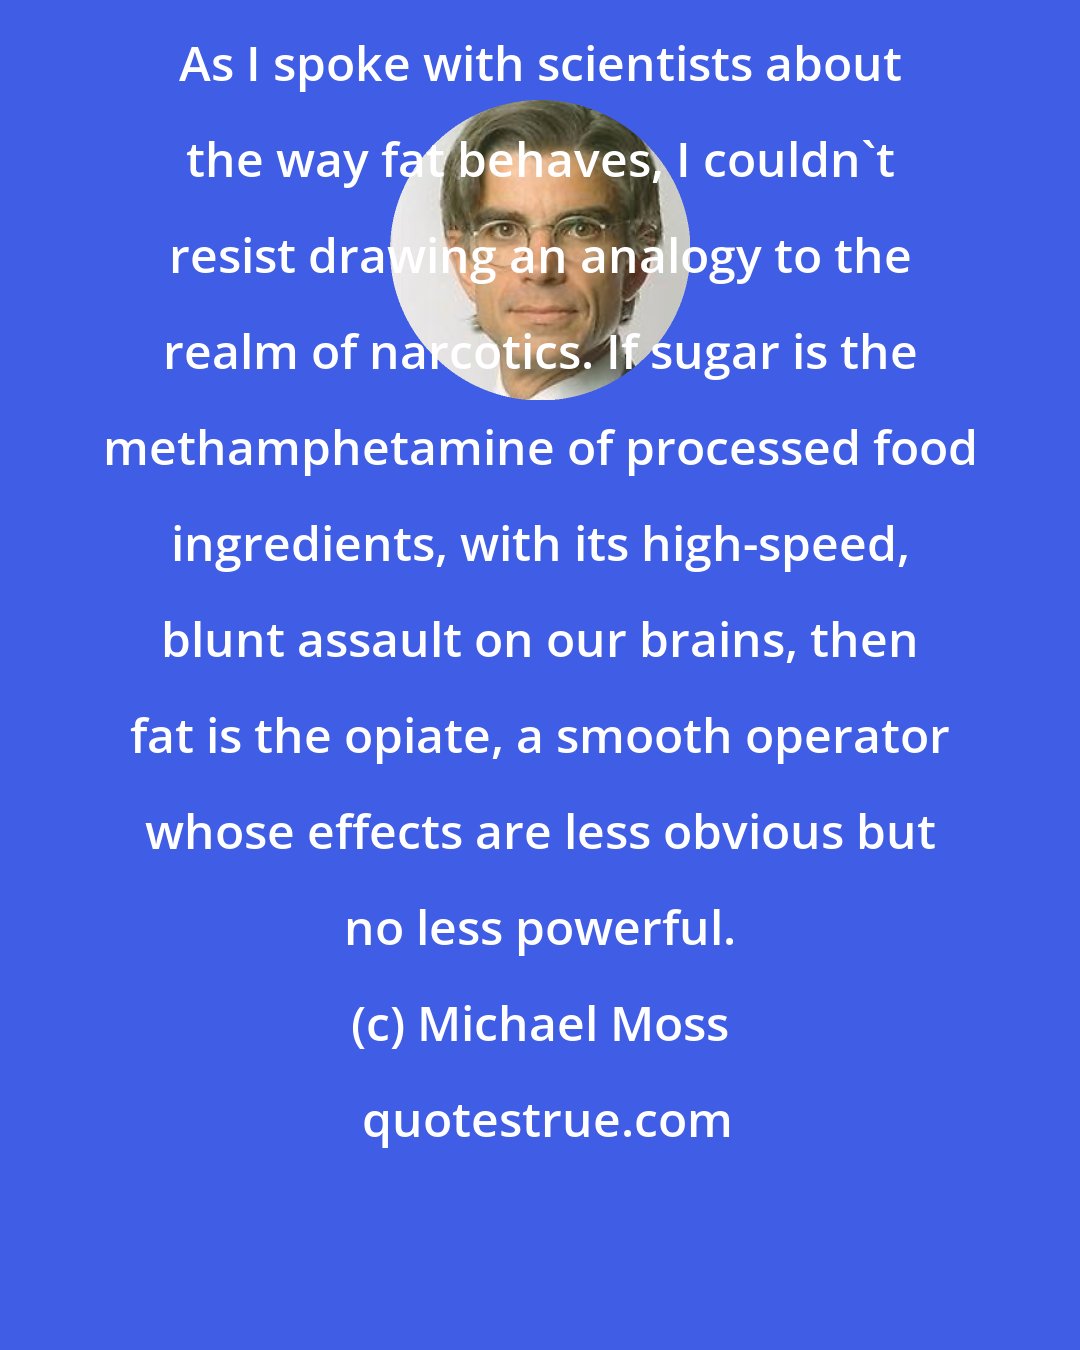 Michael Moss: As I spoke with scientists about the way fat behaves, I couldn't resist drawing an analogy to the realm of narcotics. If sugar is the methamphetamine of processed food ingredients, with its high-speed, blunt assault on our brains, then fat is the opiate, a smooth operator whose effects are less obvious but no less powerful.